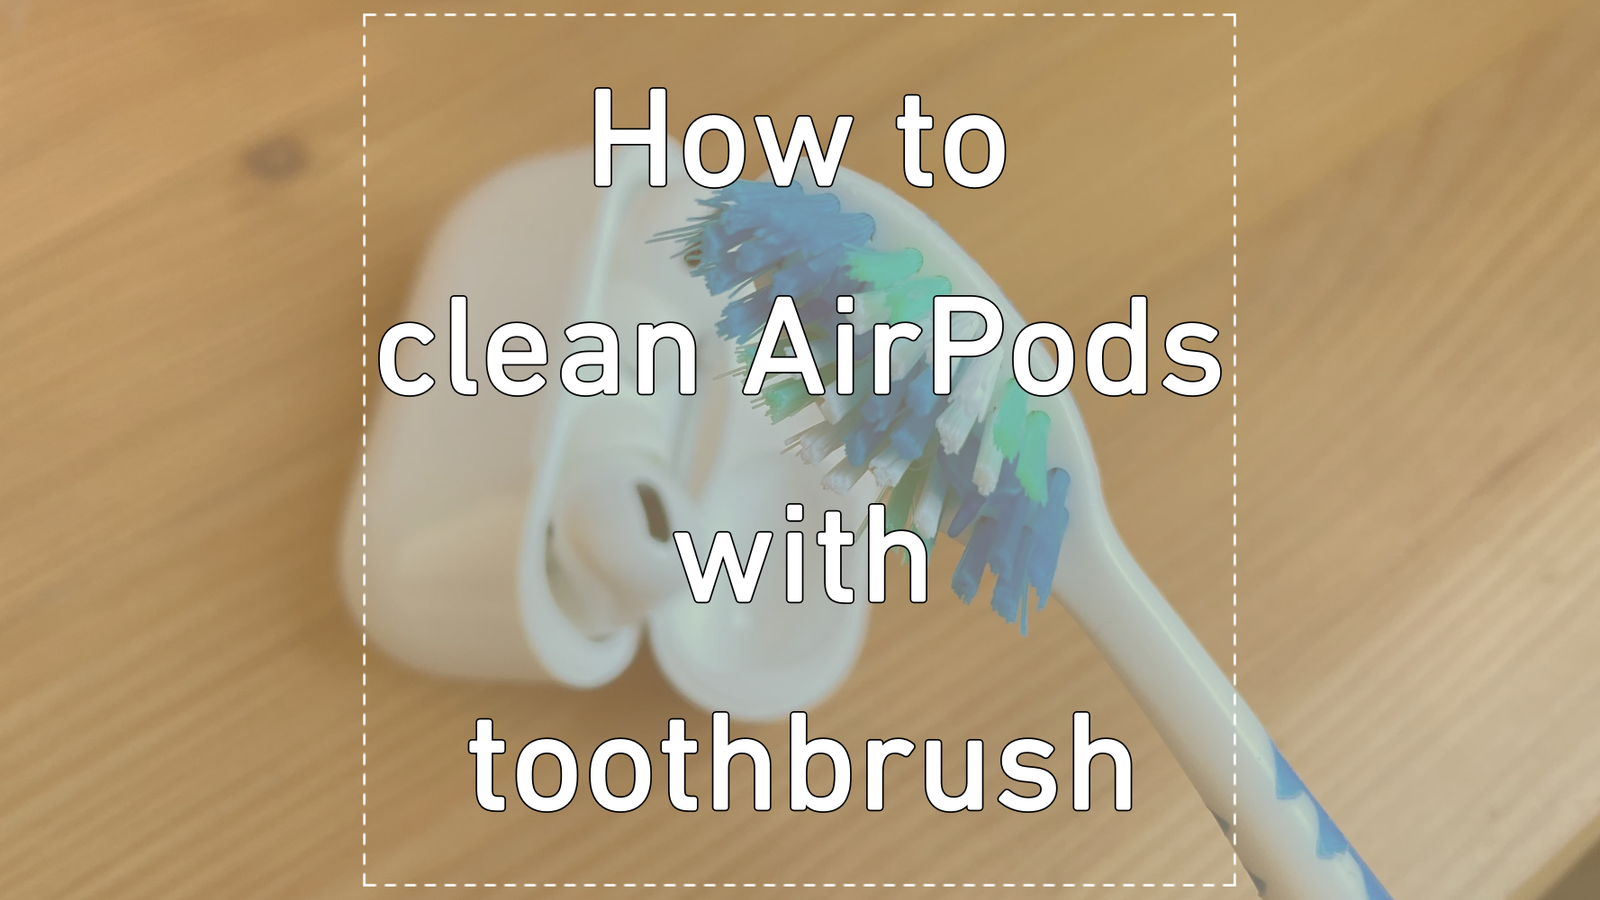 How to clean AirPods with toothbrush